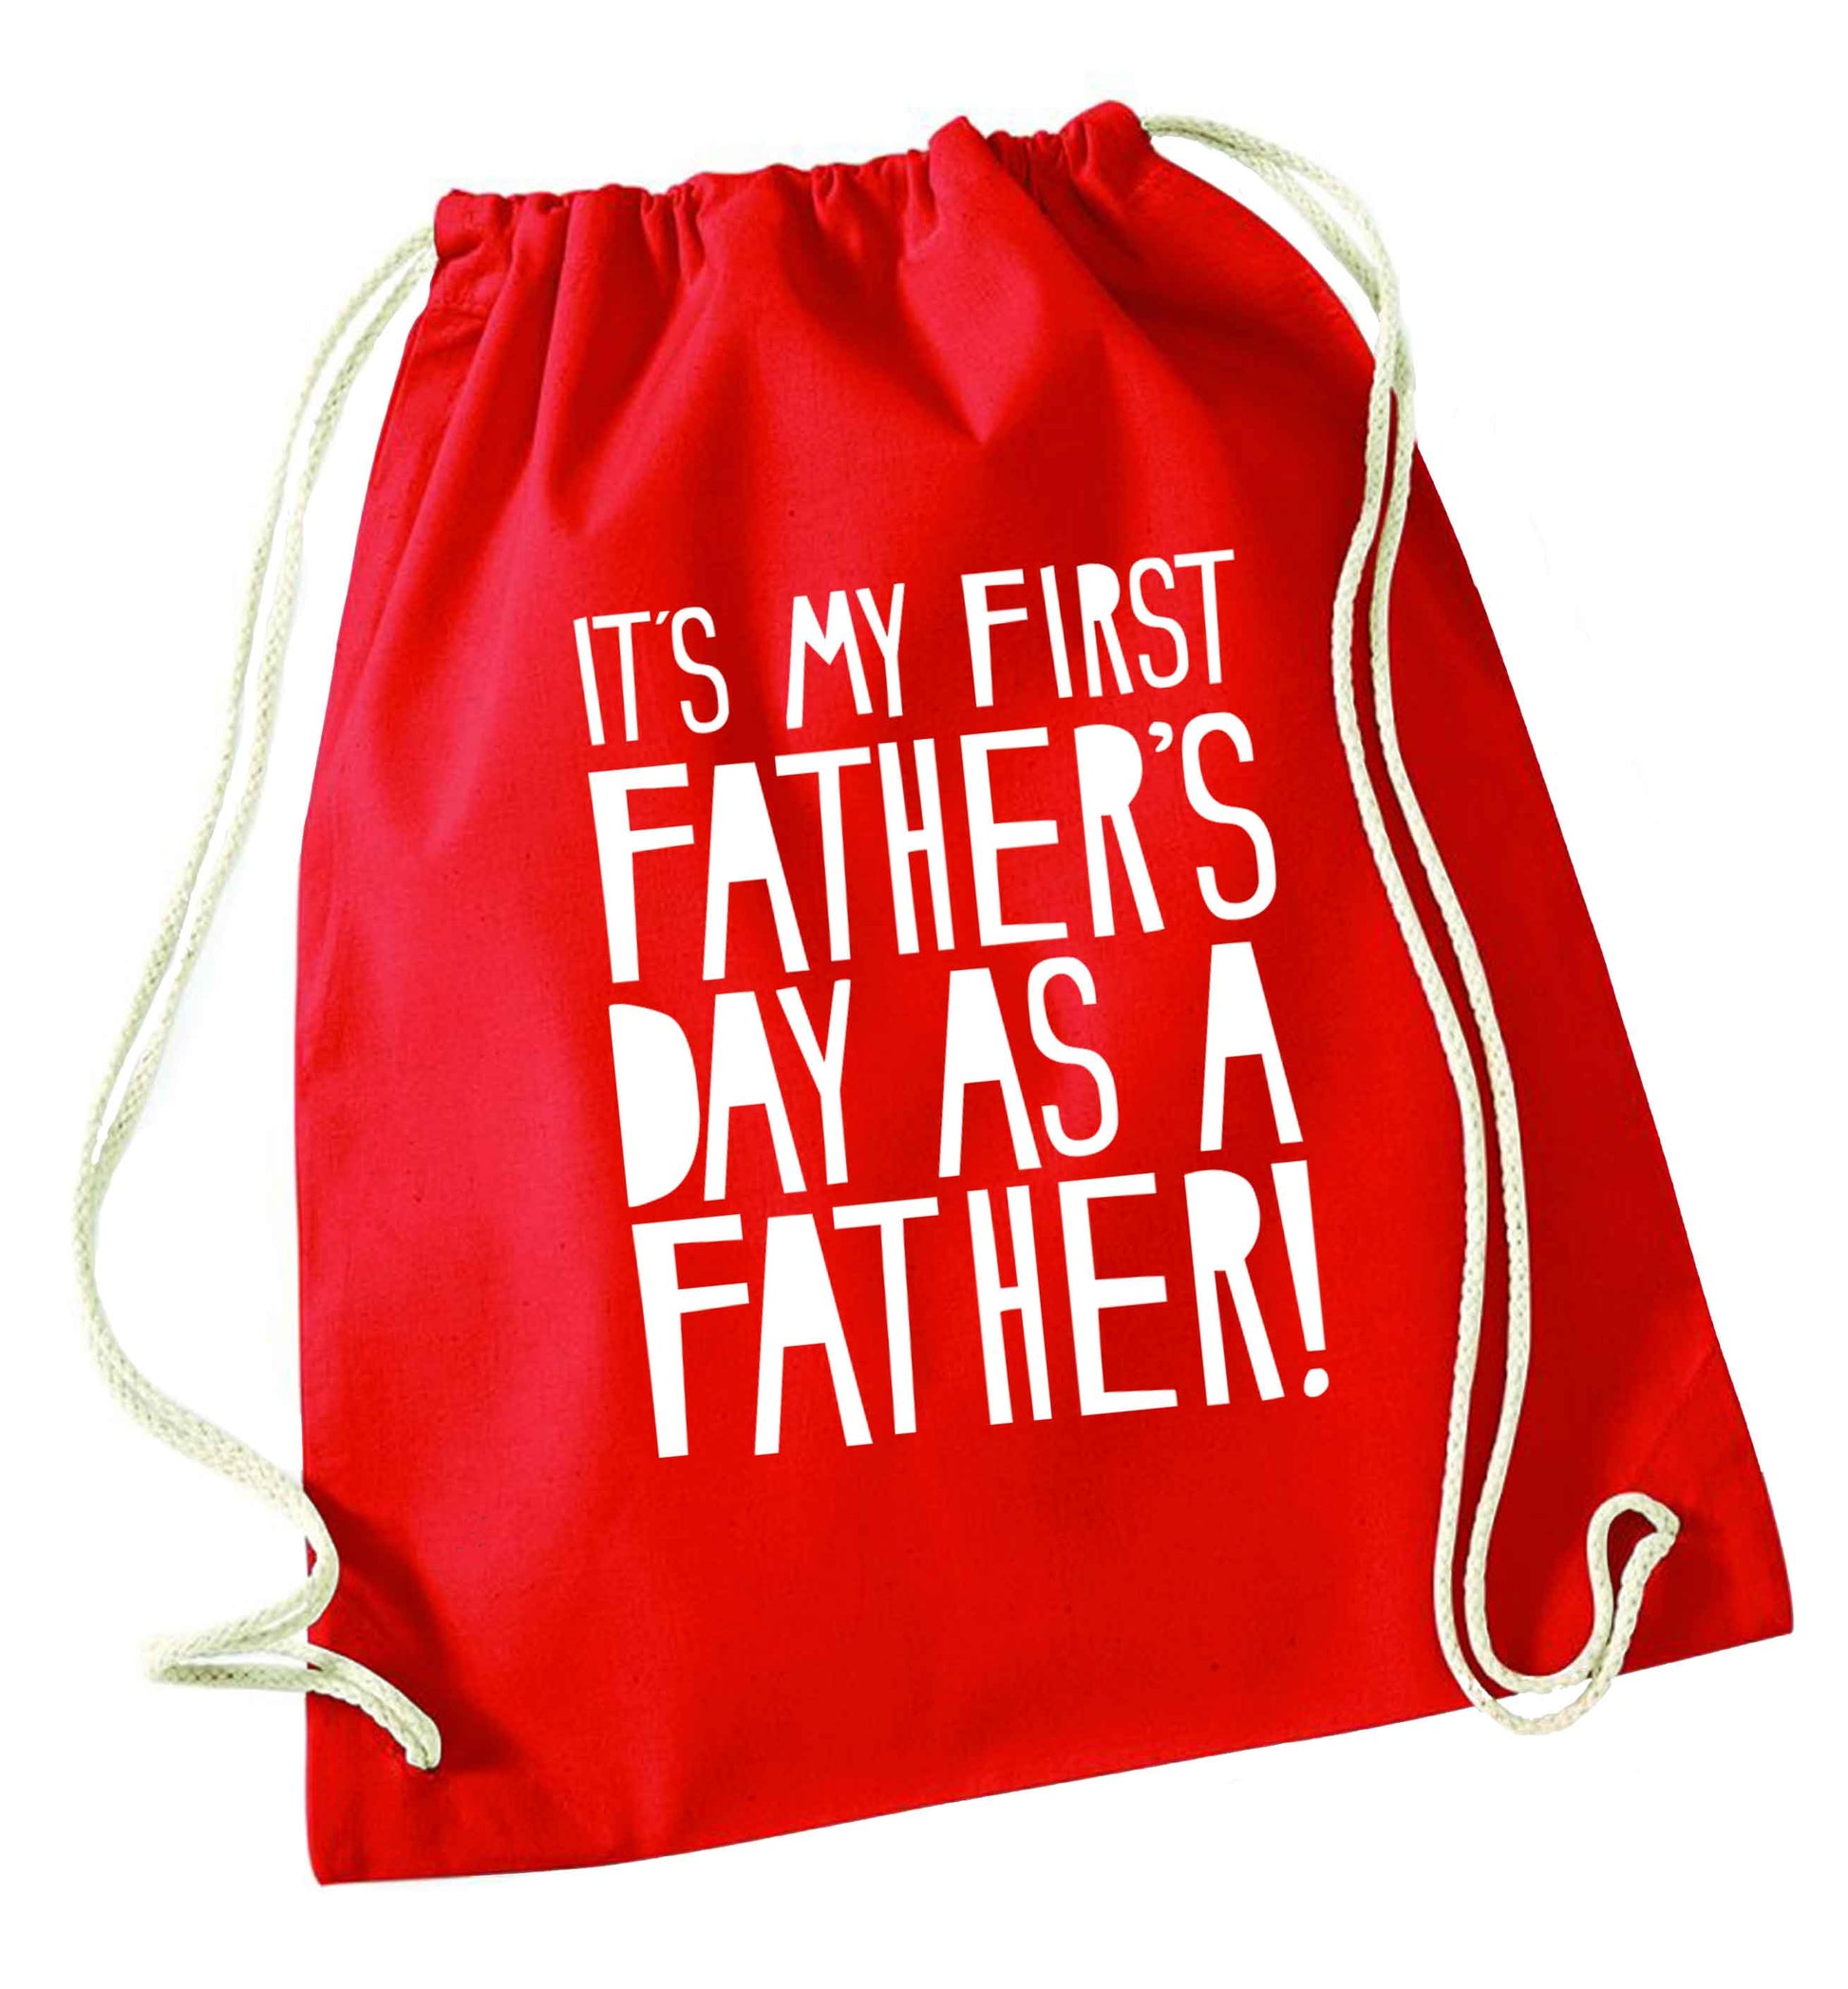 It's my first father's day as a father! red drawstring bag 